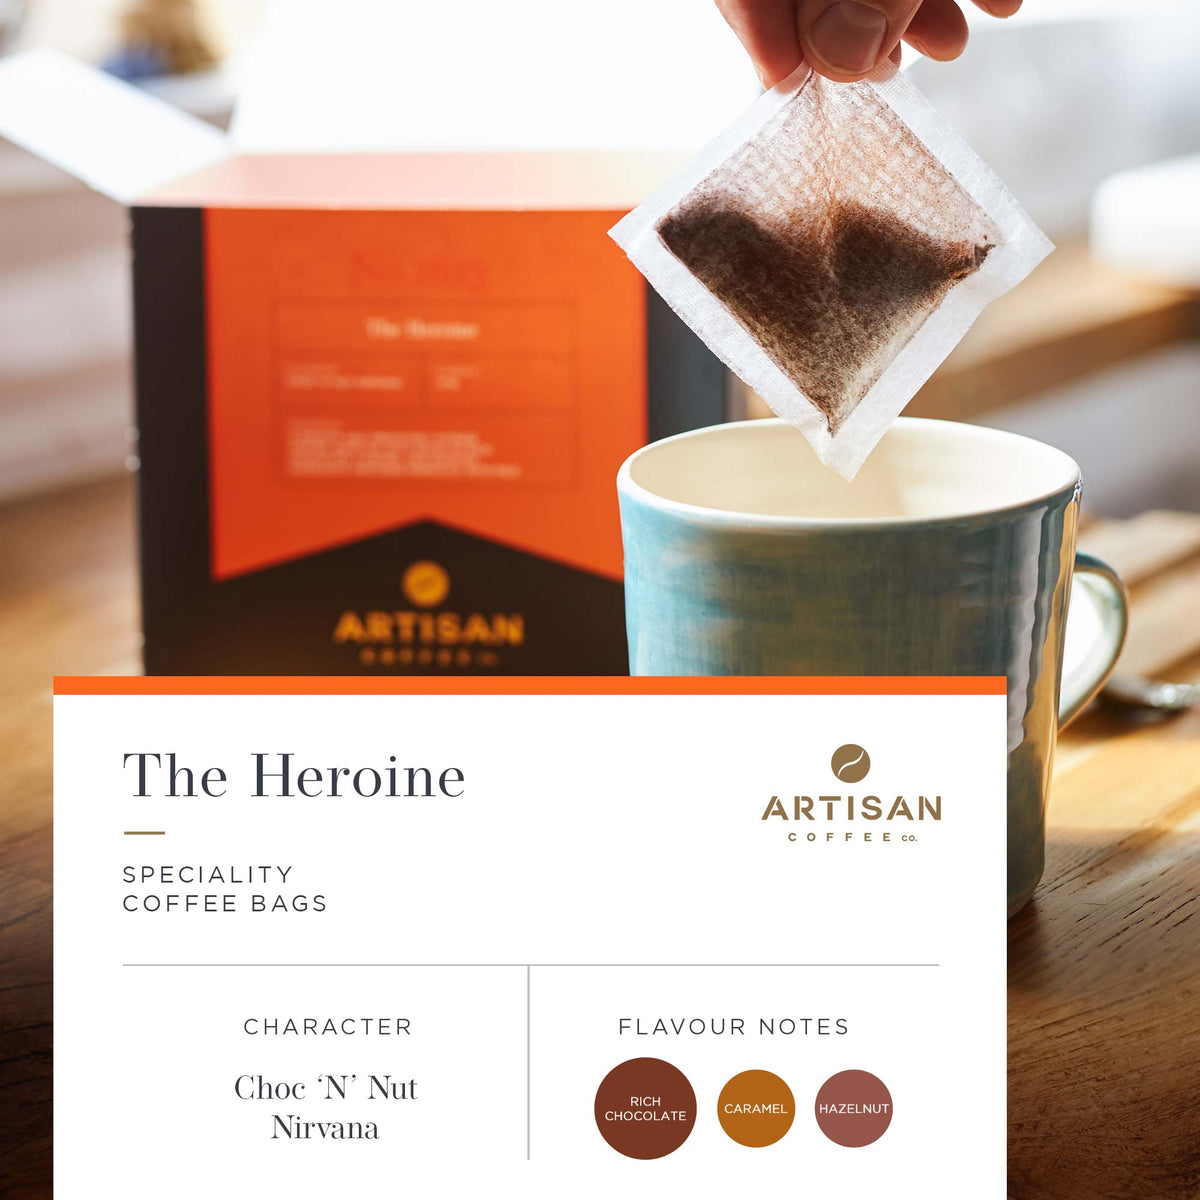 Artisan Coffee Co The Heroine Coffee bags Infographic Flavour notes